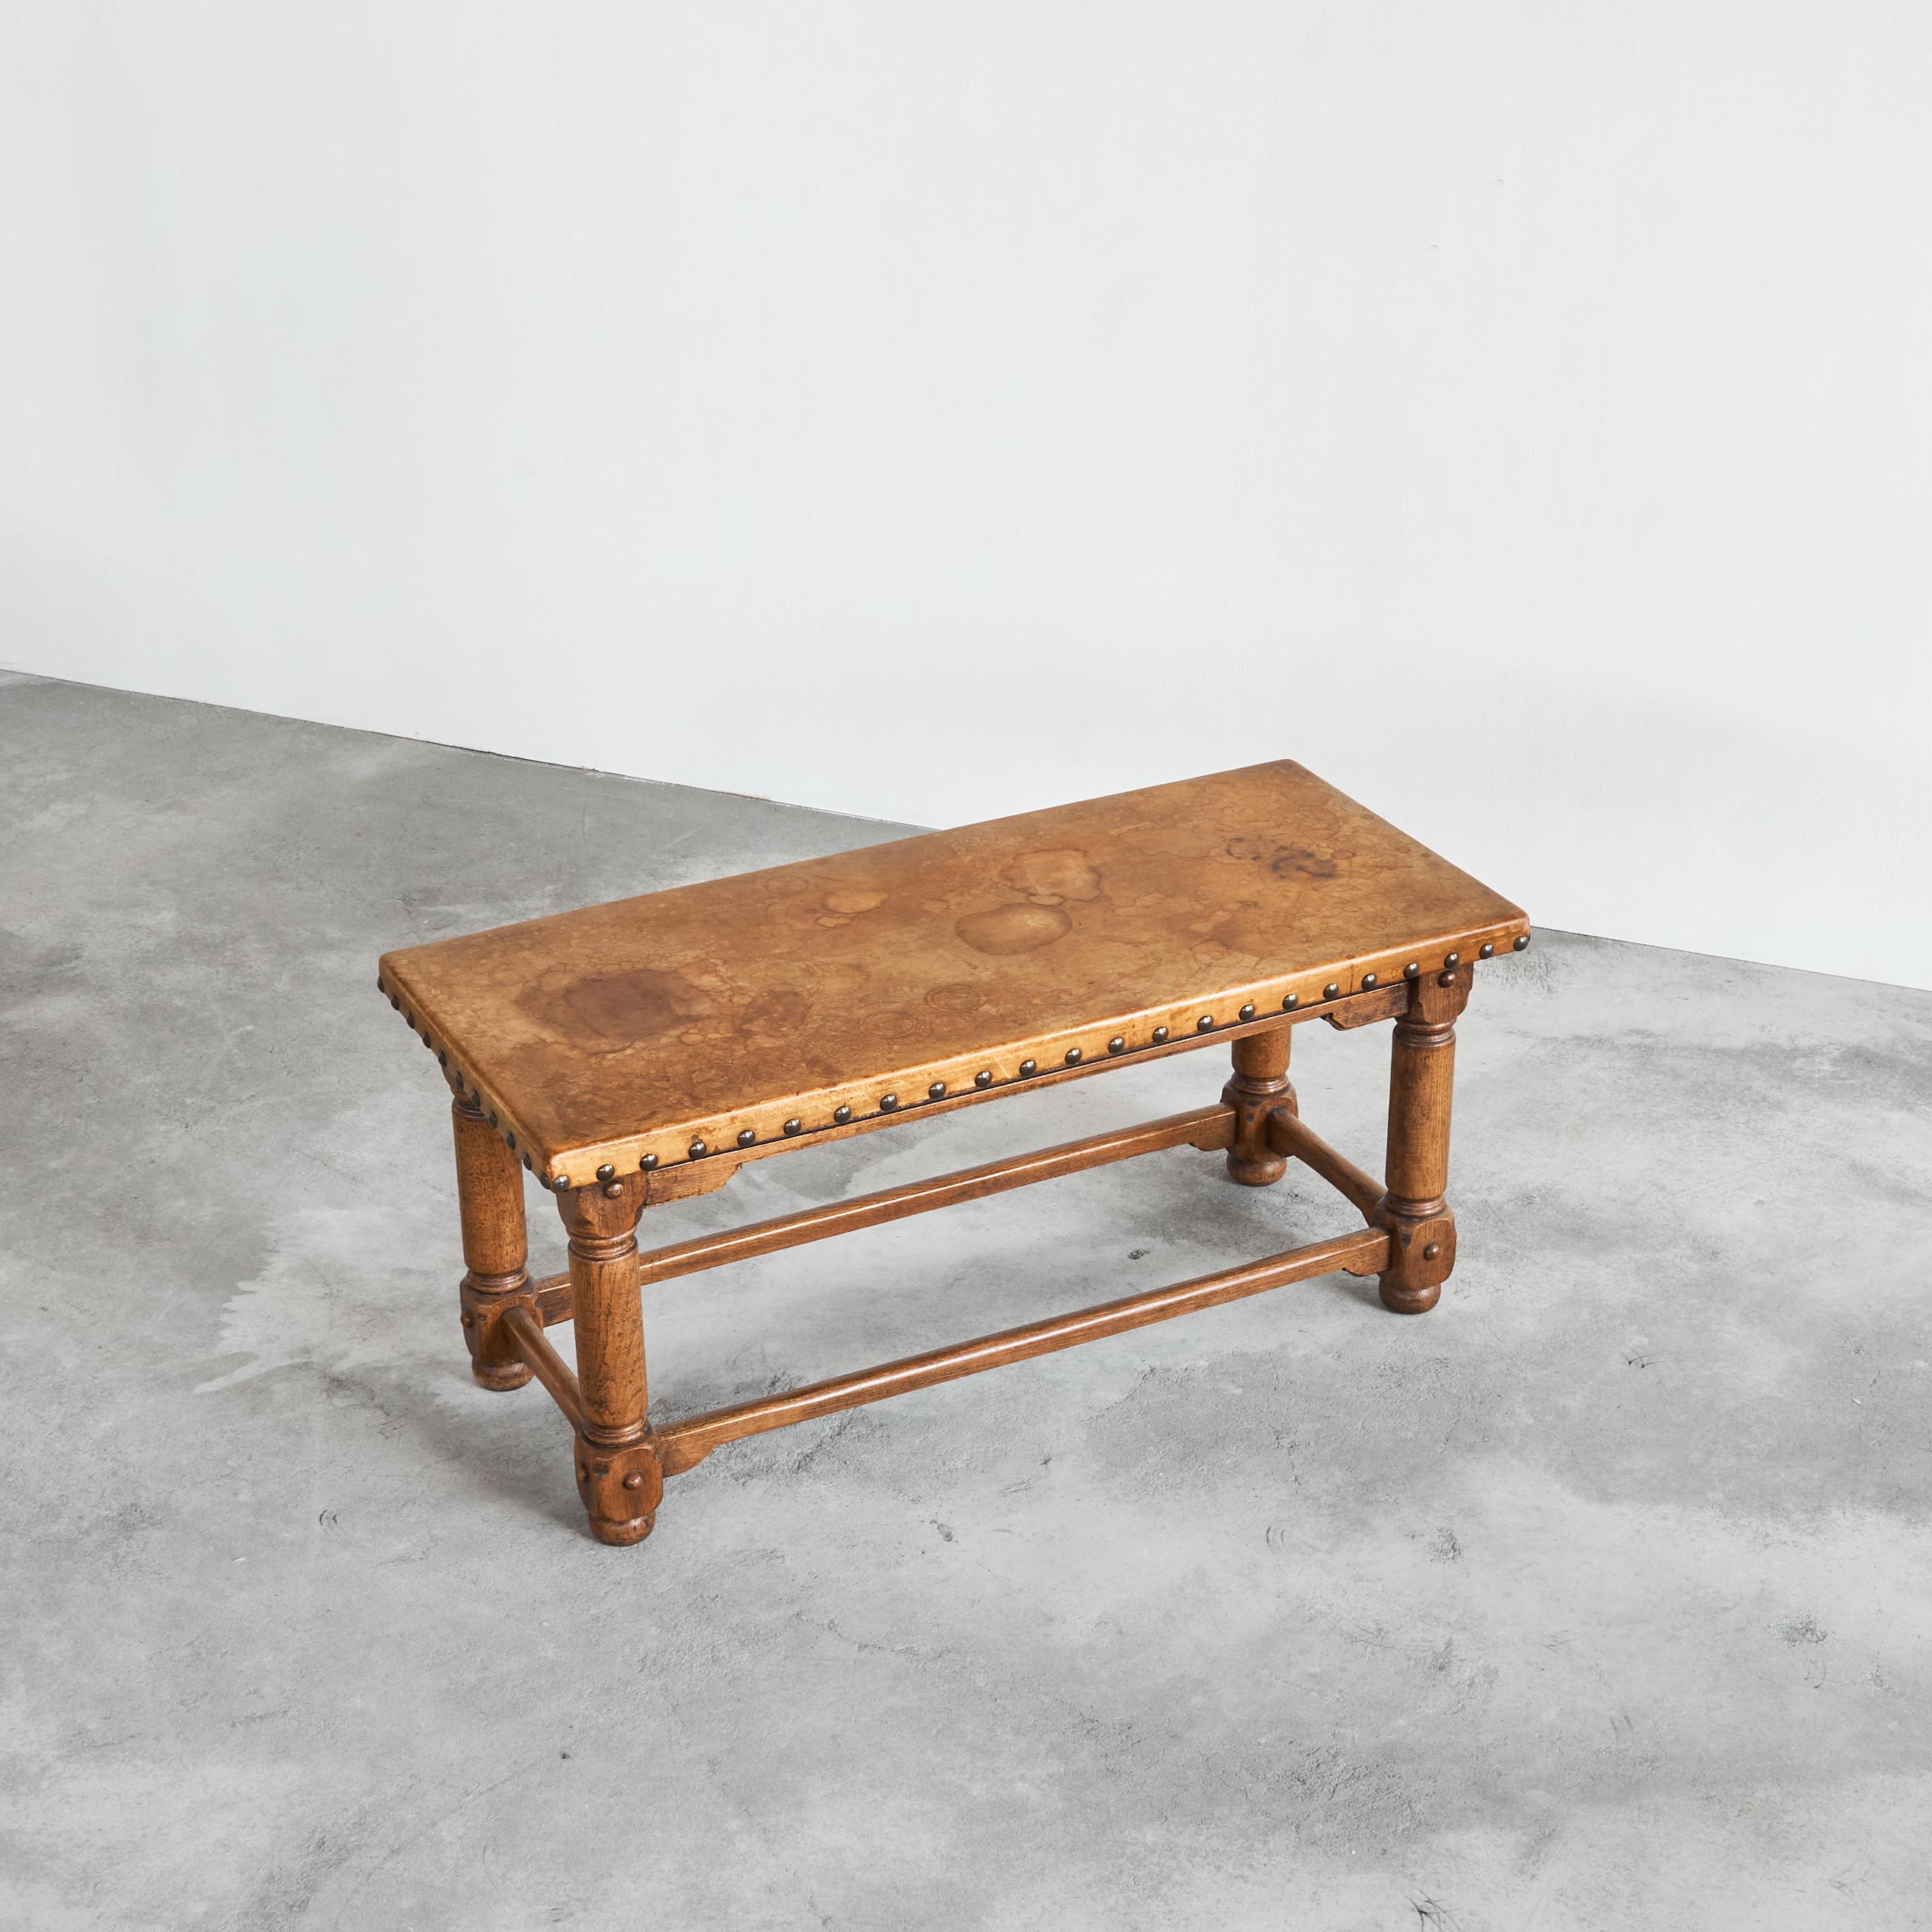 Spanish Brutalist Coffee Table in Solid Oak, Metal and Patinated Cognac Leather, 1940s or 1950s.

This is a wonderful, rare, early and untouched 1940s or 1950s coffee table with a cognac leather top in solid oak and metal in a very distinct Spanish